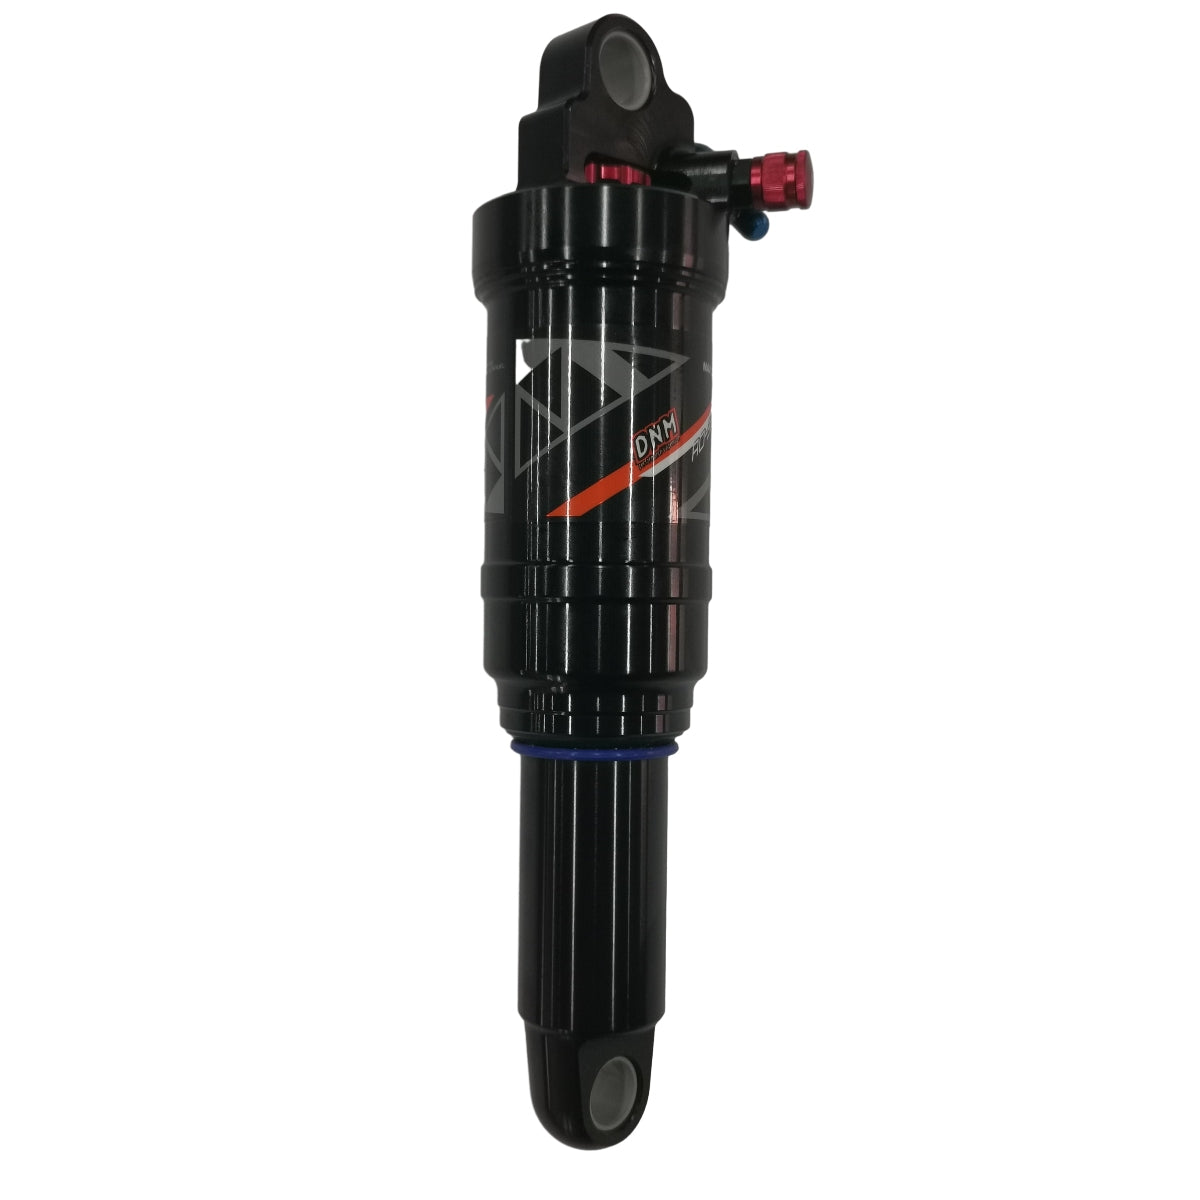 Electric Bike Air Rear Shock With Lockout Fit for EUNORAU SPECTER-S